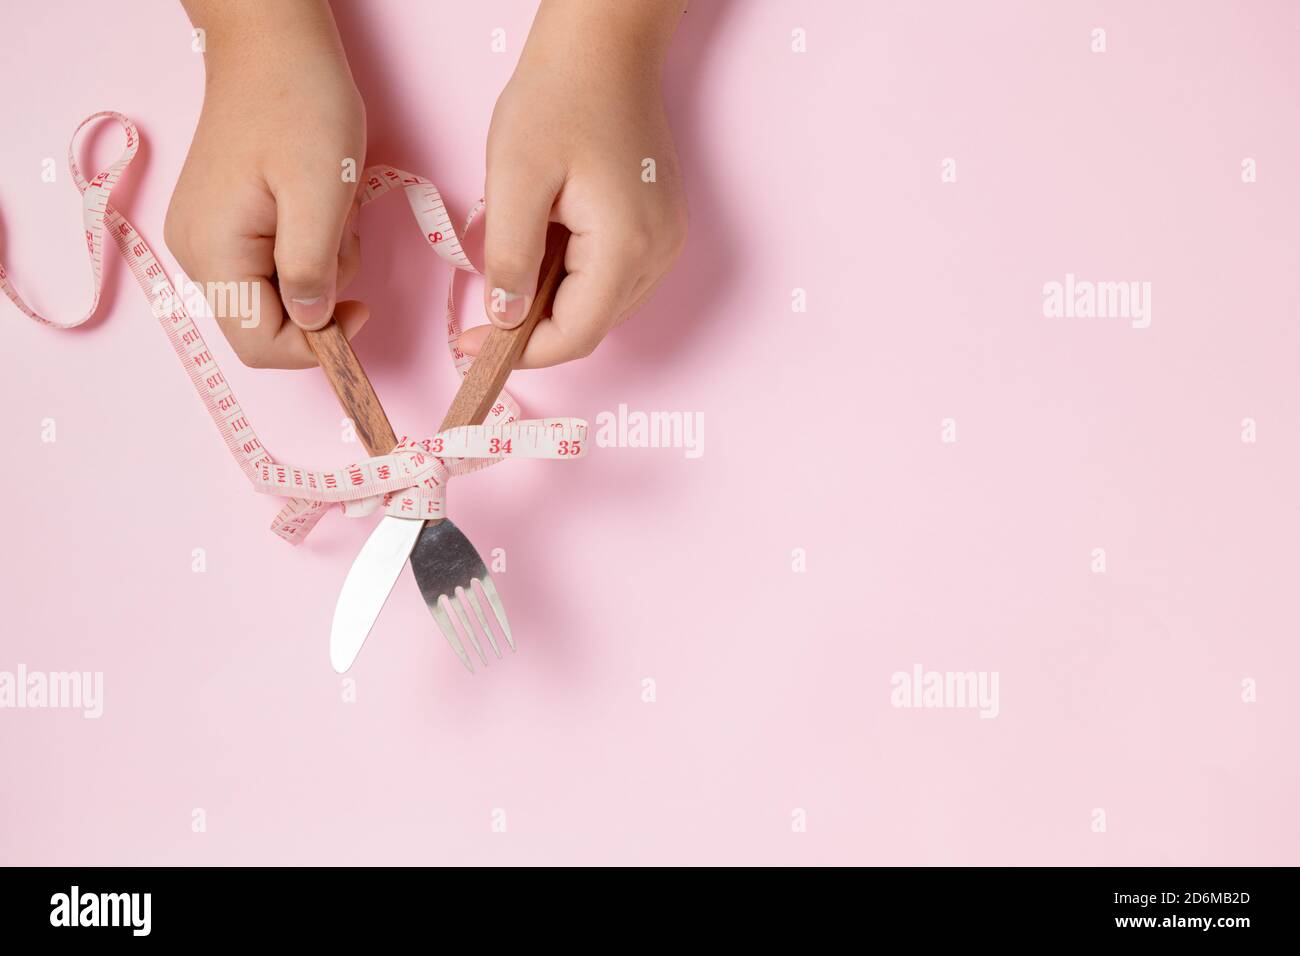 Fat boy hand holding knife and fork wrapped in measuring tape on pink background. diet concept Stock Photo